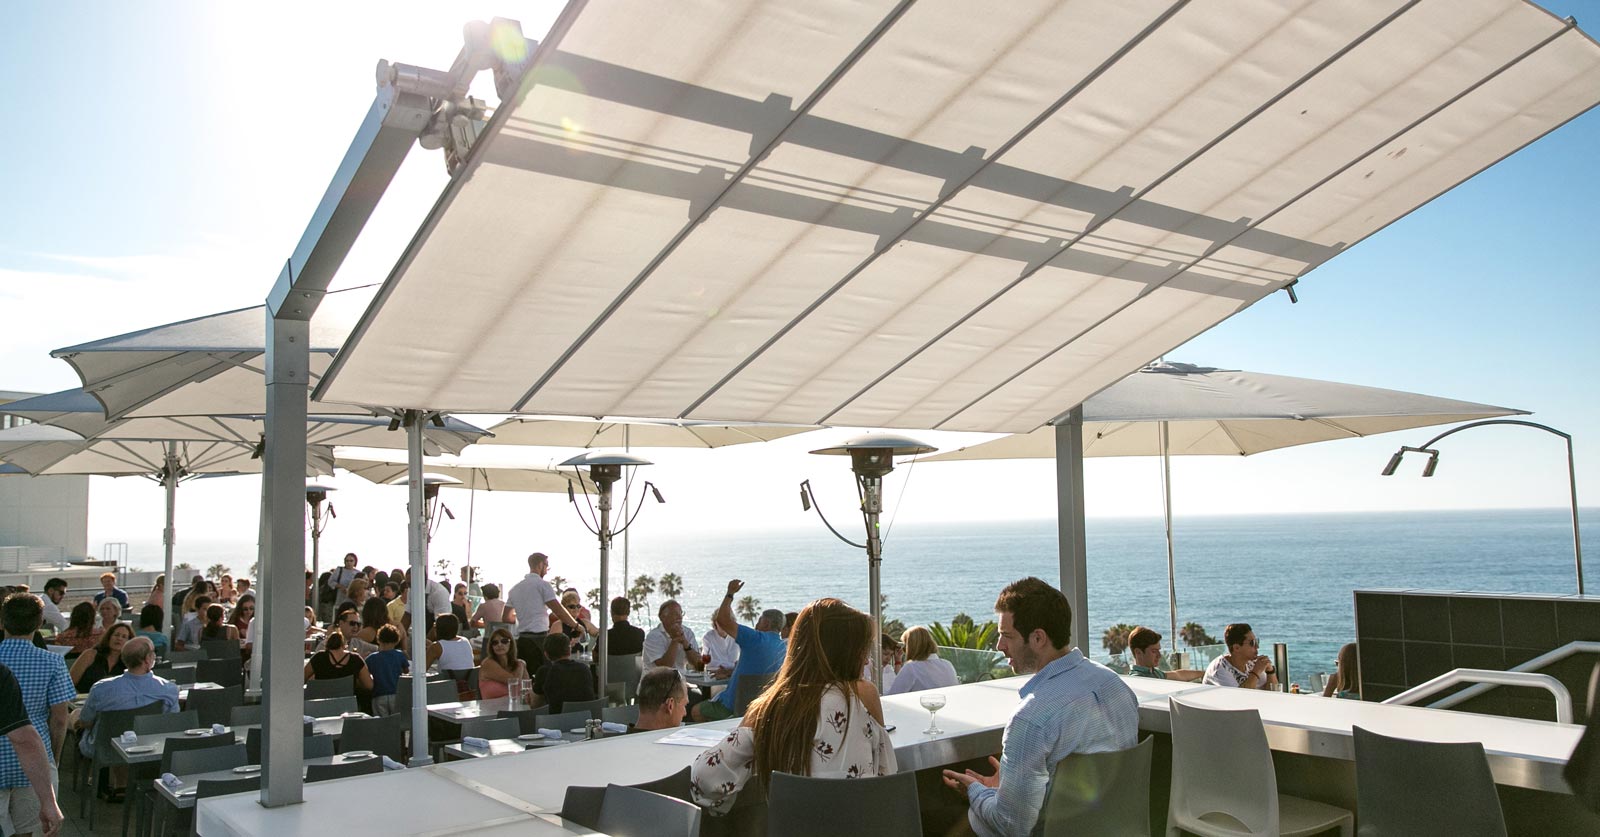 Goerges at the Cove patio overlooking the Pacific Ocean in San Diego